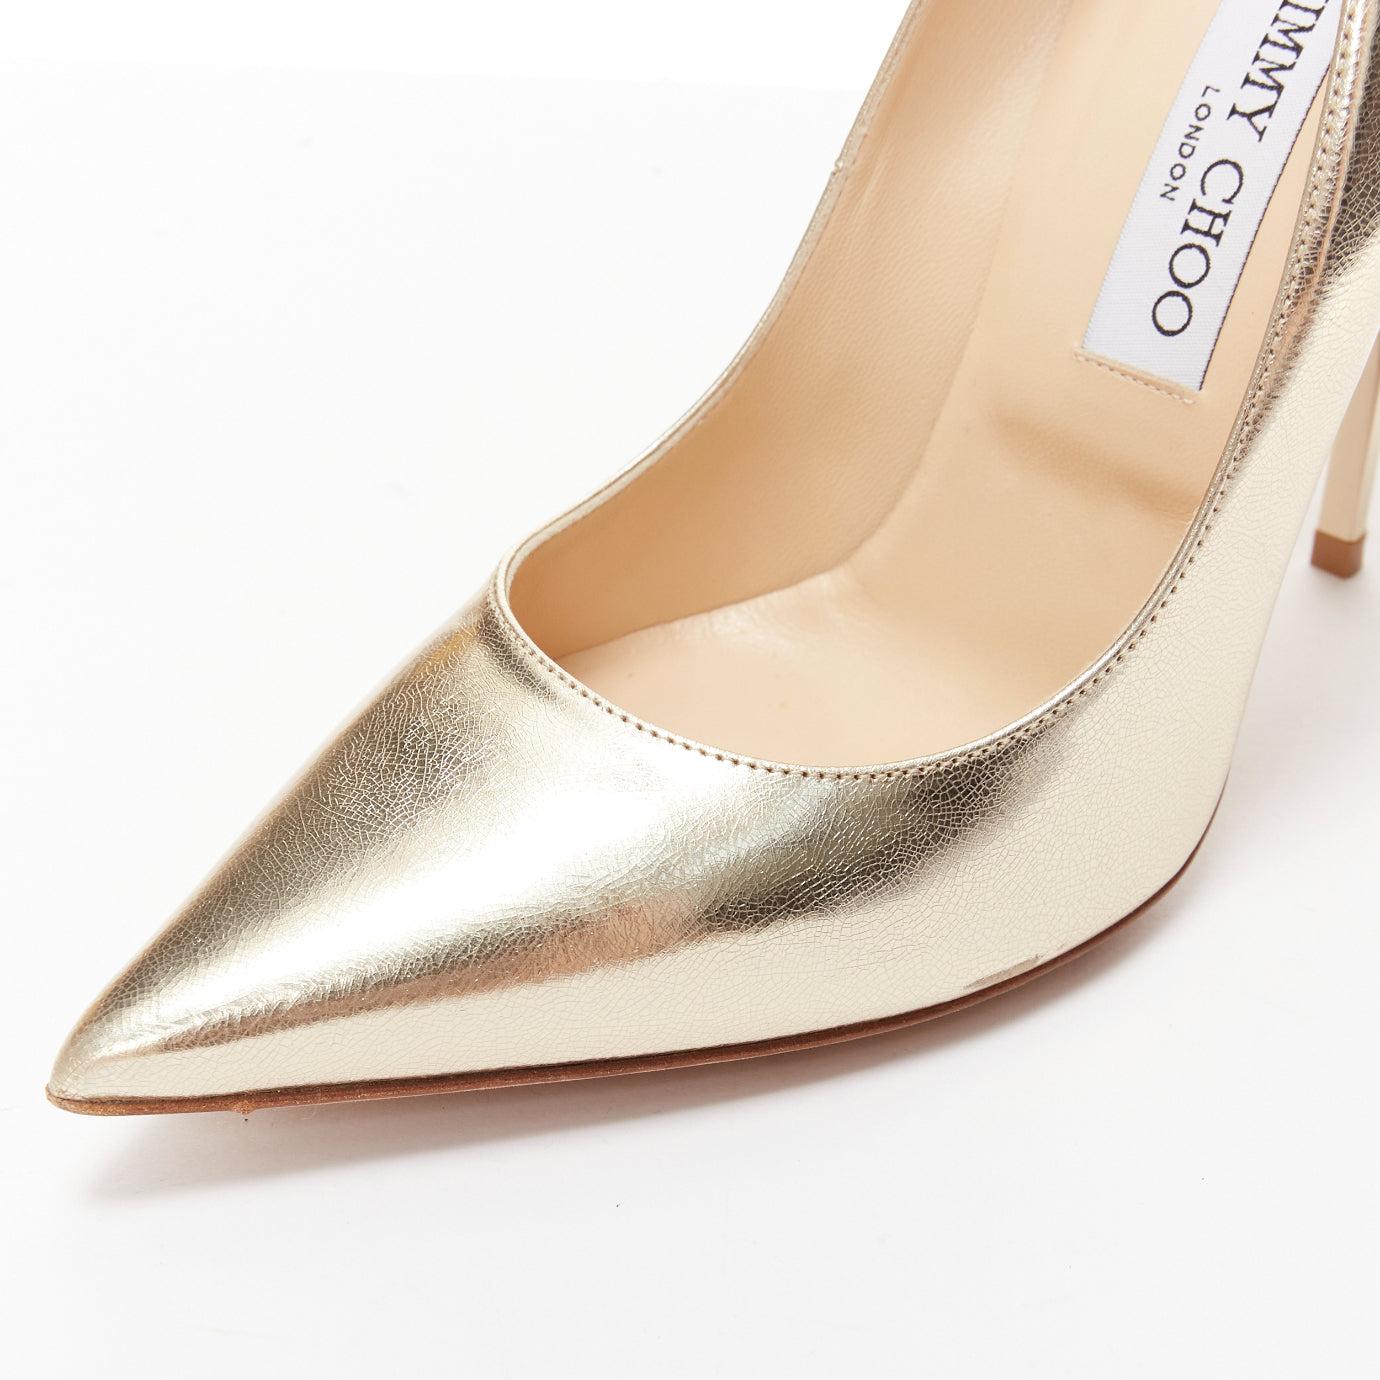 JIMMY CHOO Anouk gold metallic leather classic pointy toe stiletto pumps EU39 For Sale 3